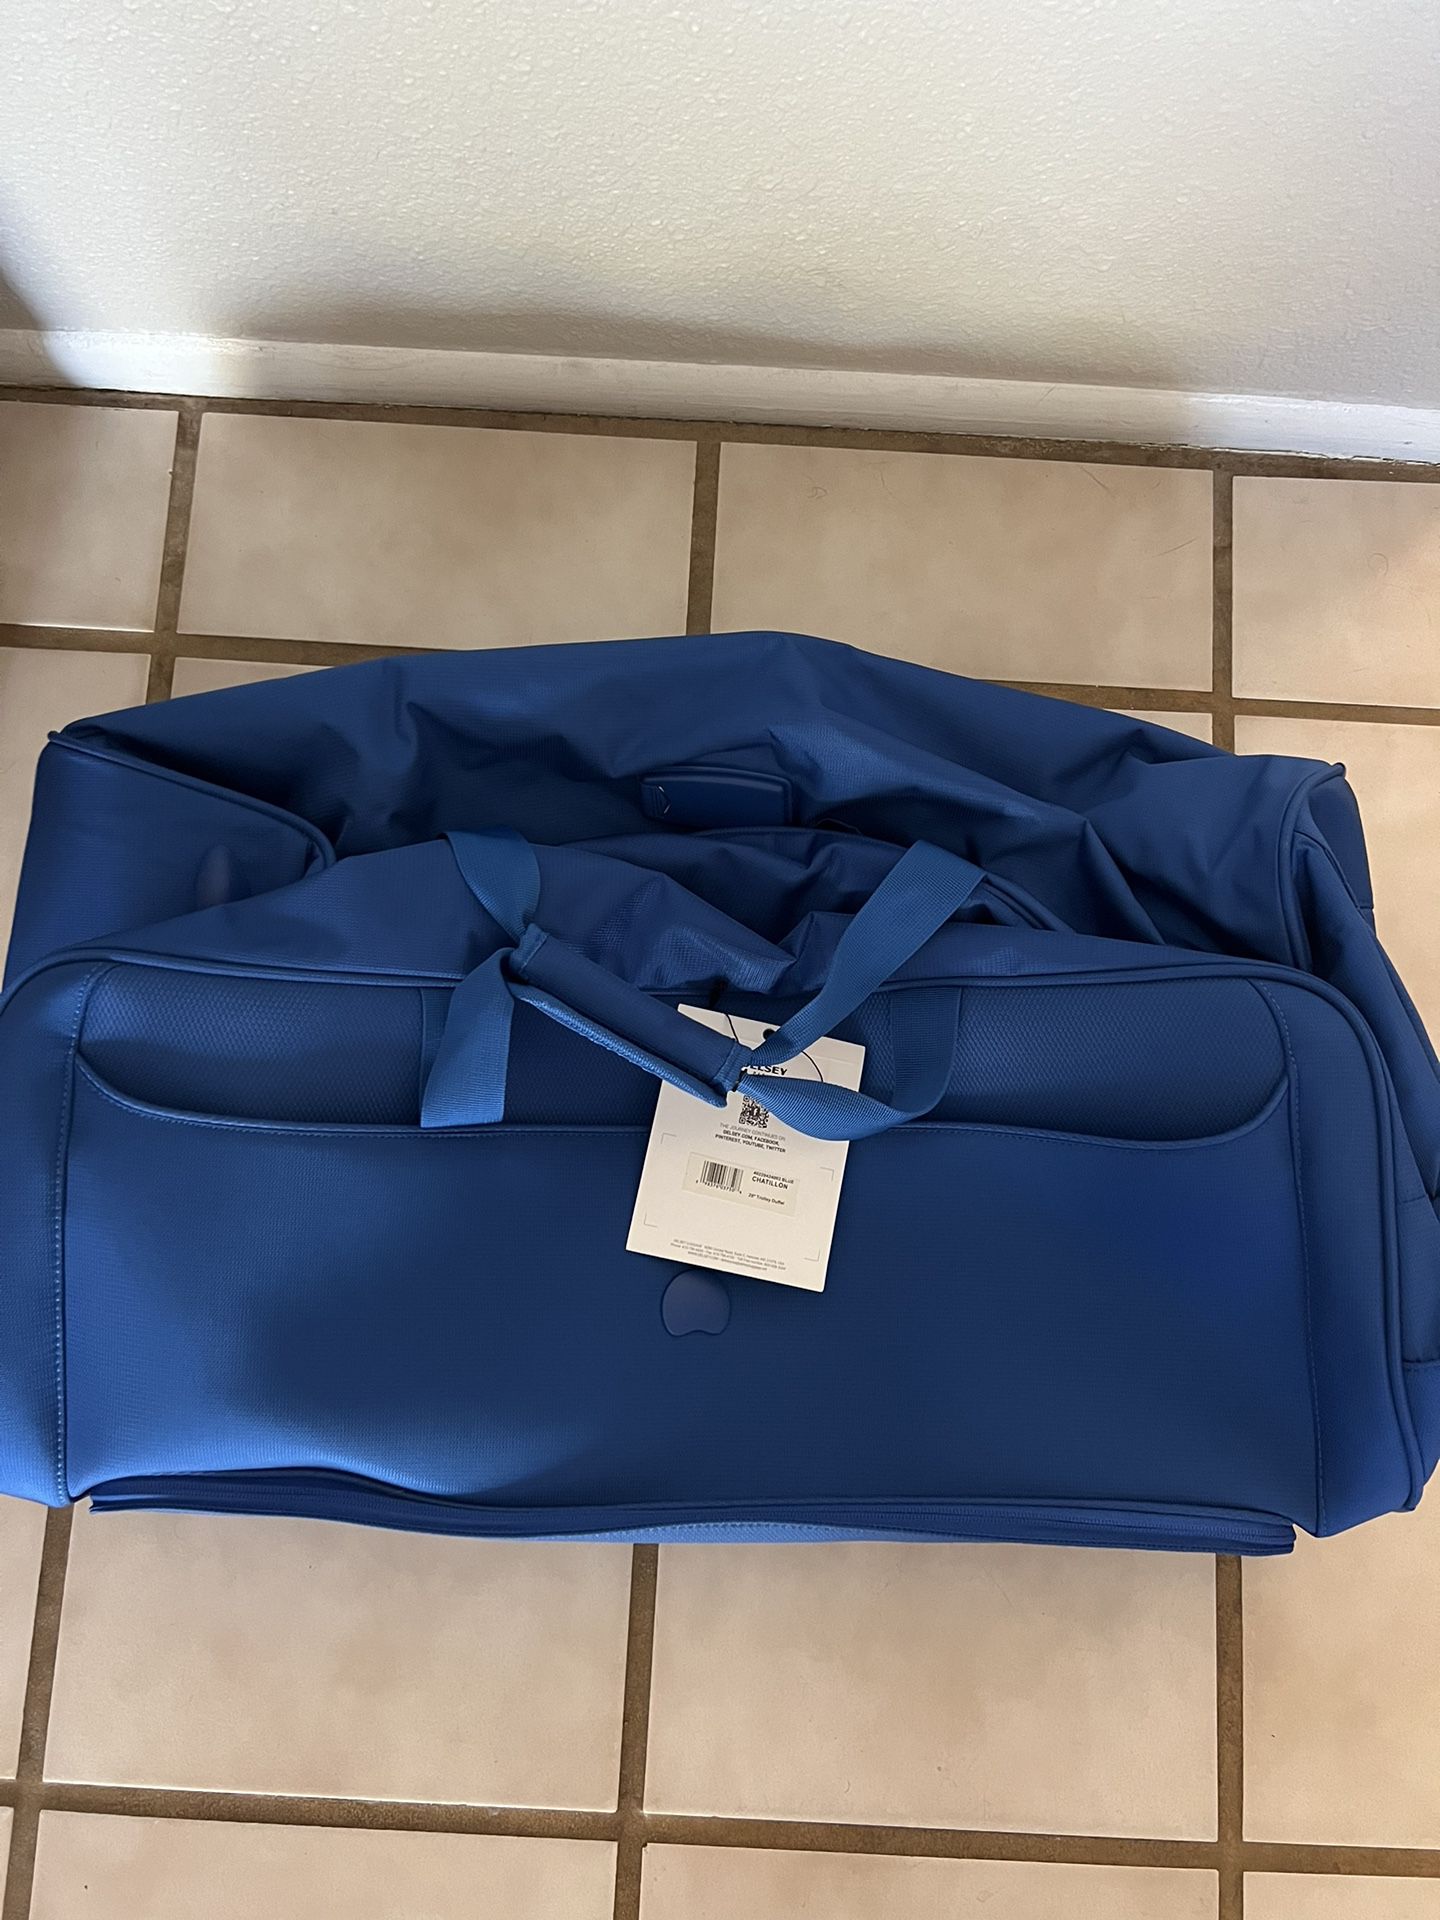 Brand New Delsey Luggage/Suitcase Blue Rolling Duffle 28”